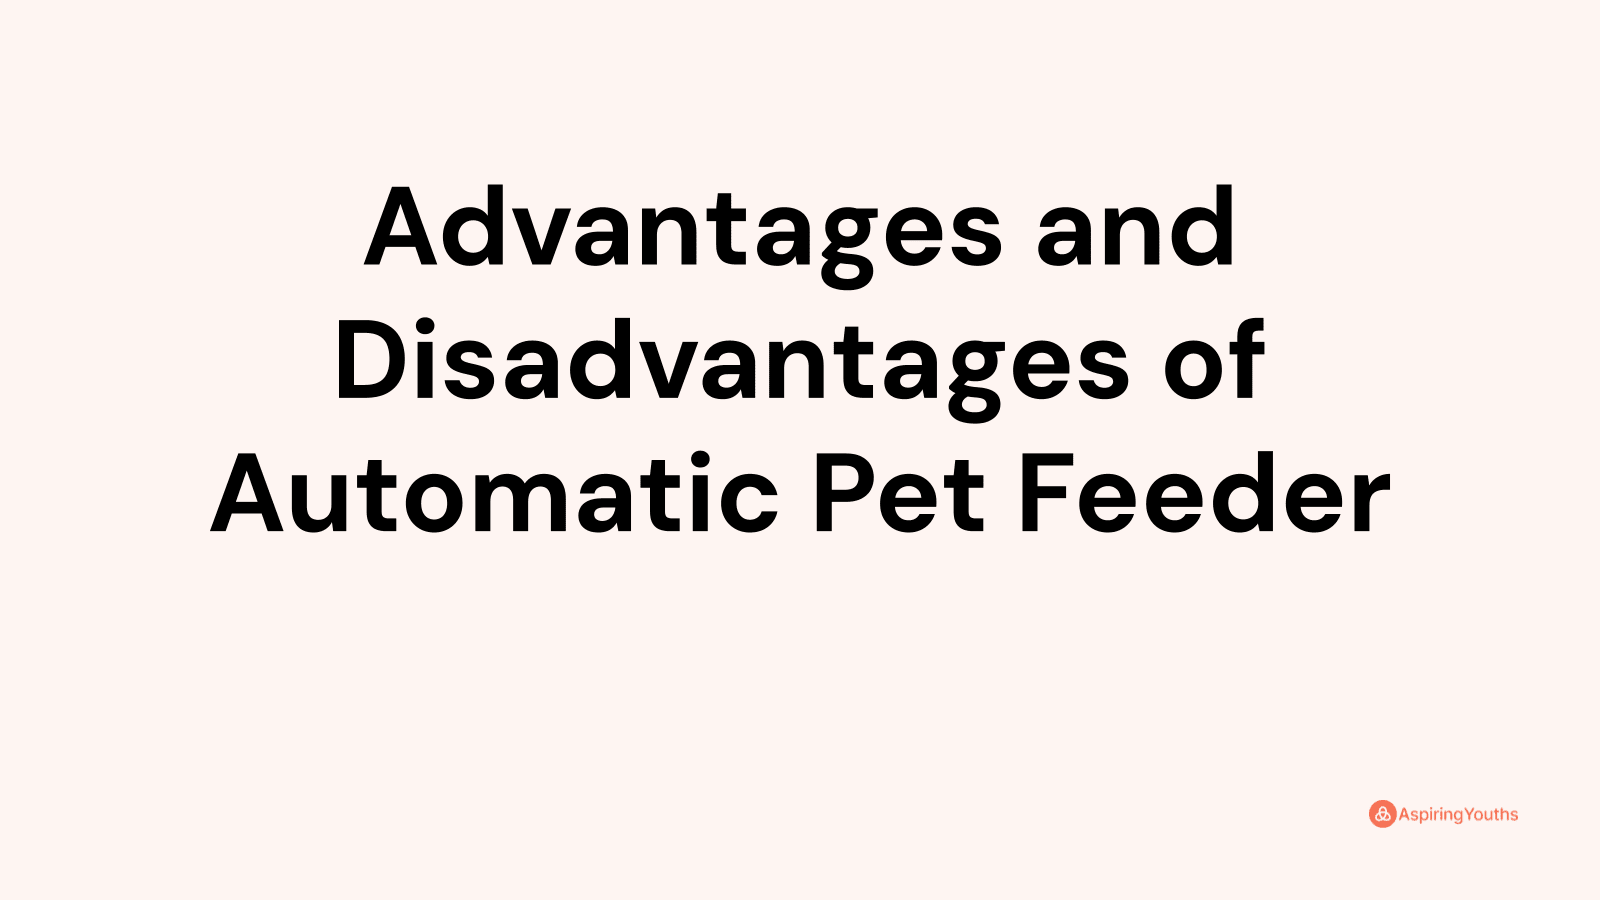 Advantages and disadvantages of Automatic Pet Feeder